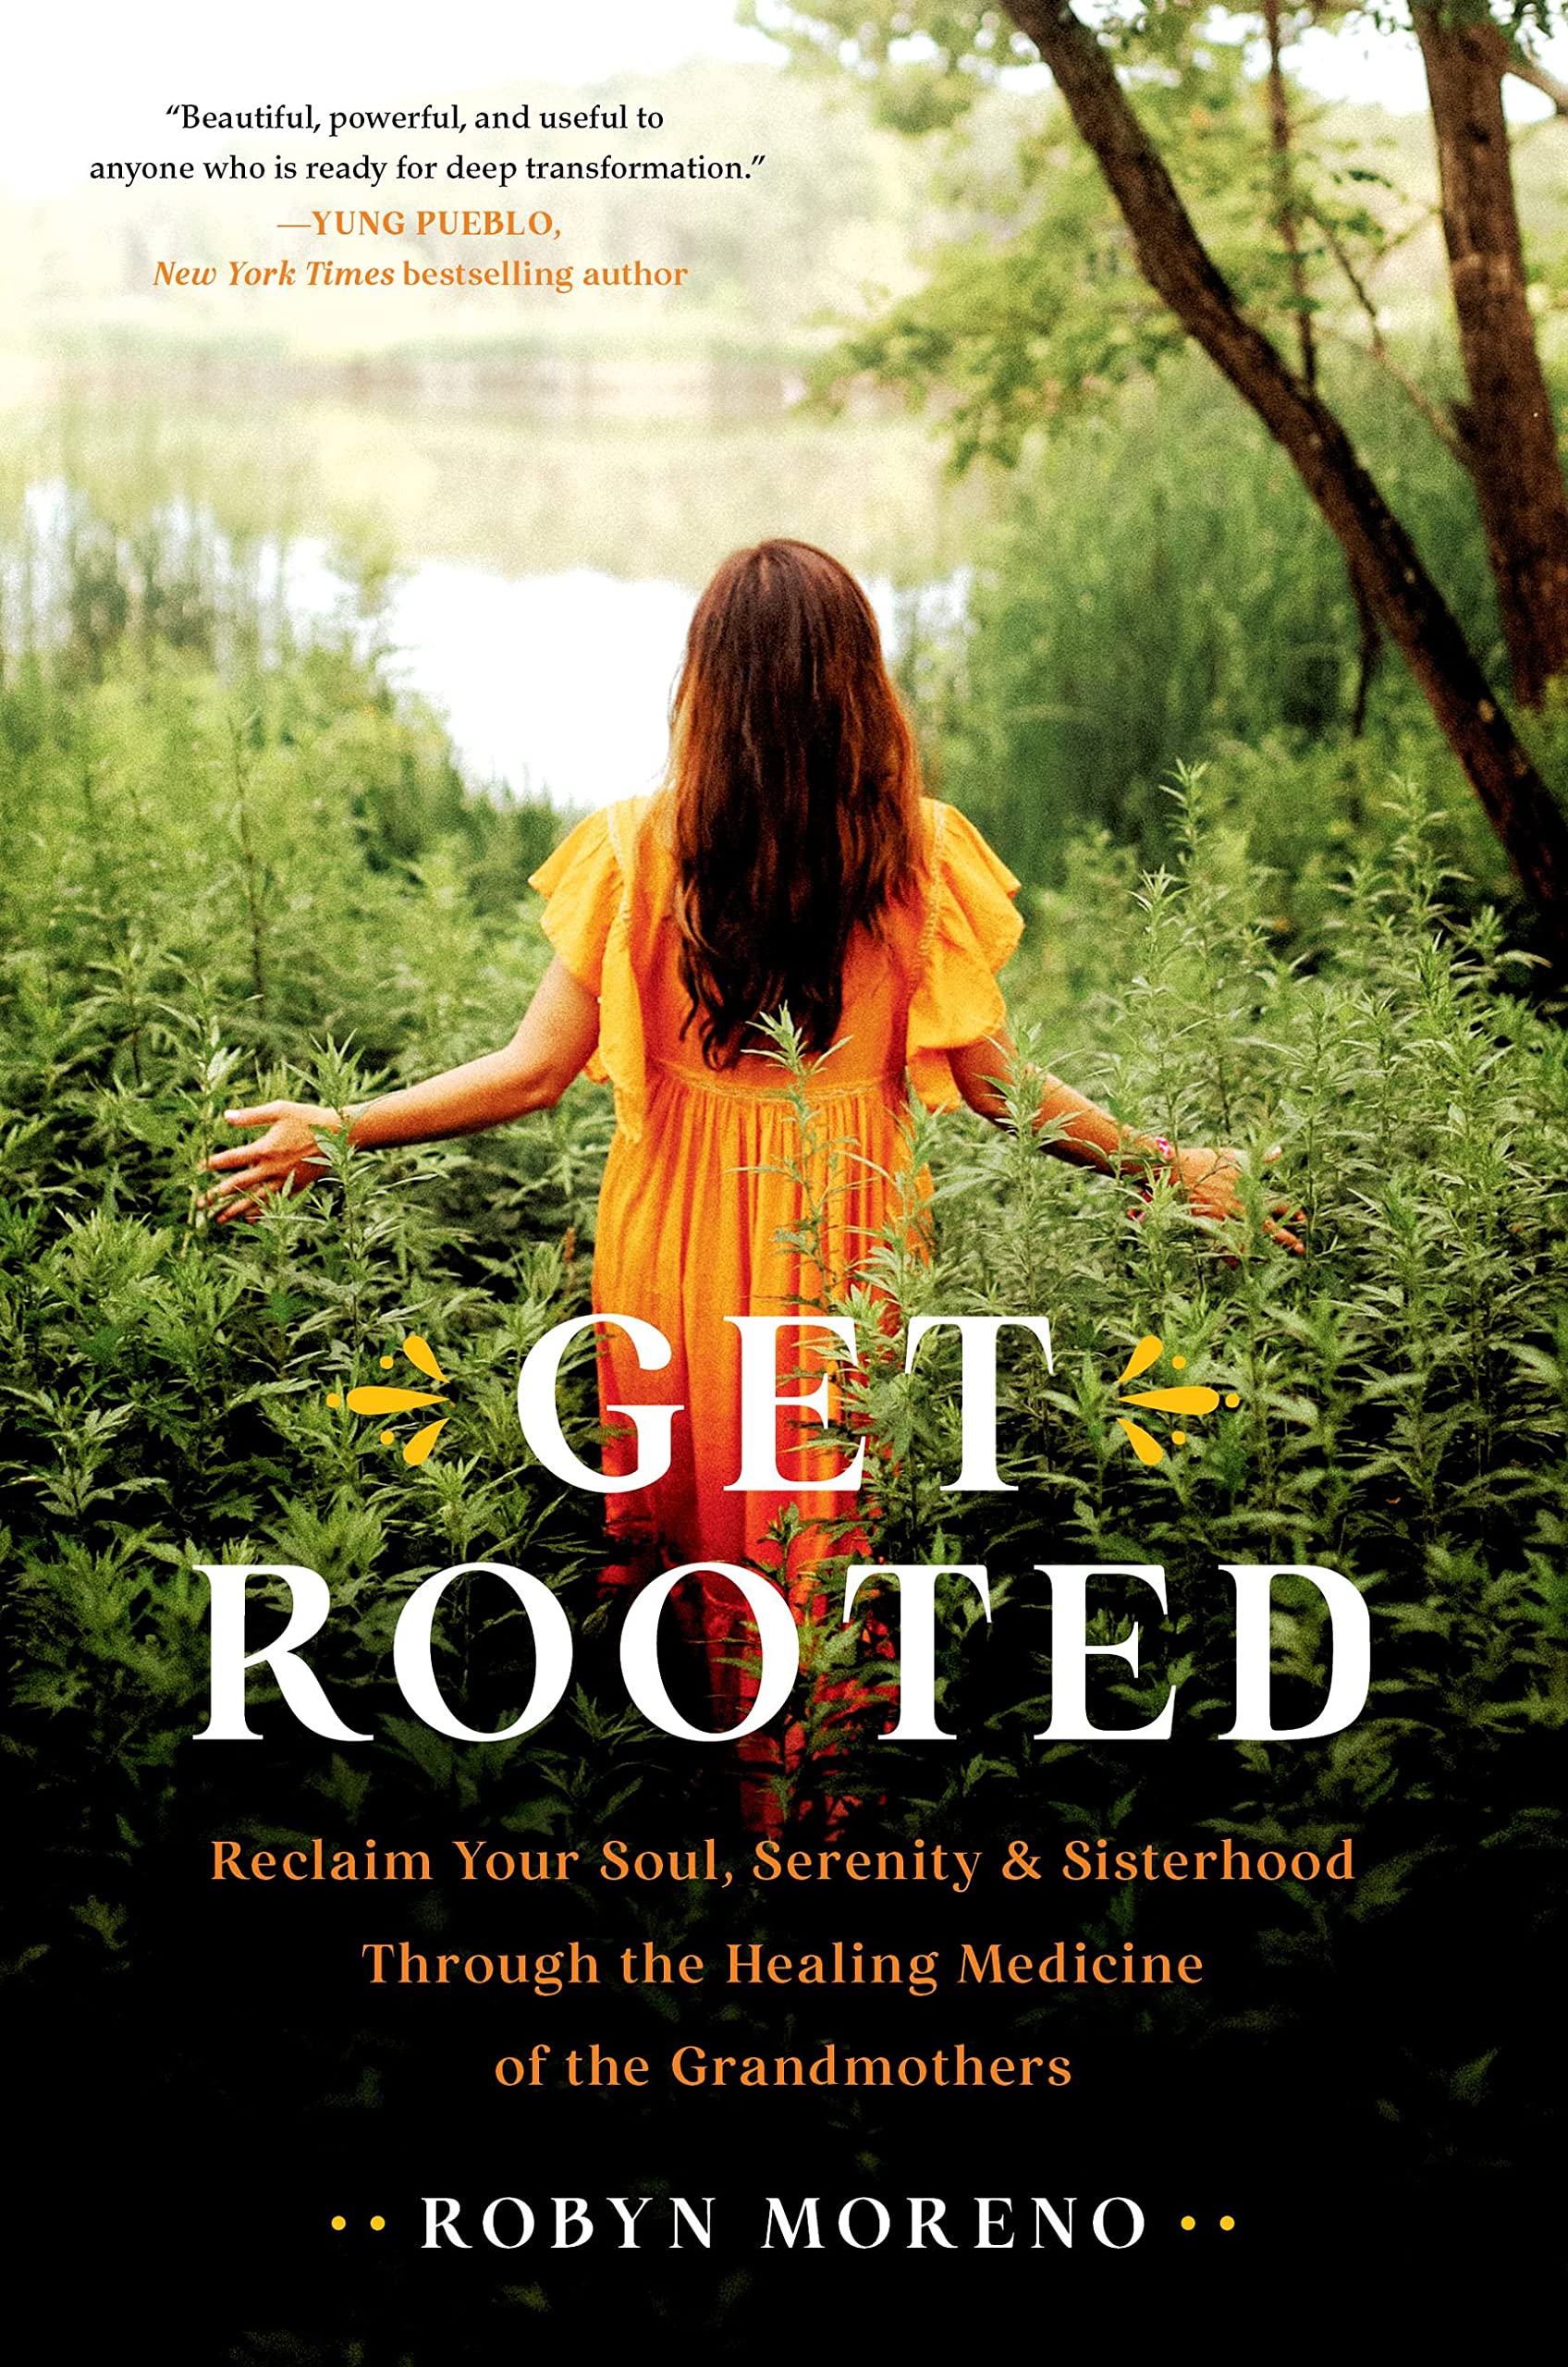 Image for "Get Rooted"